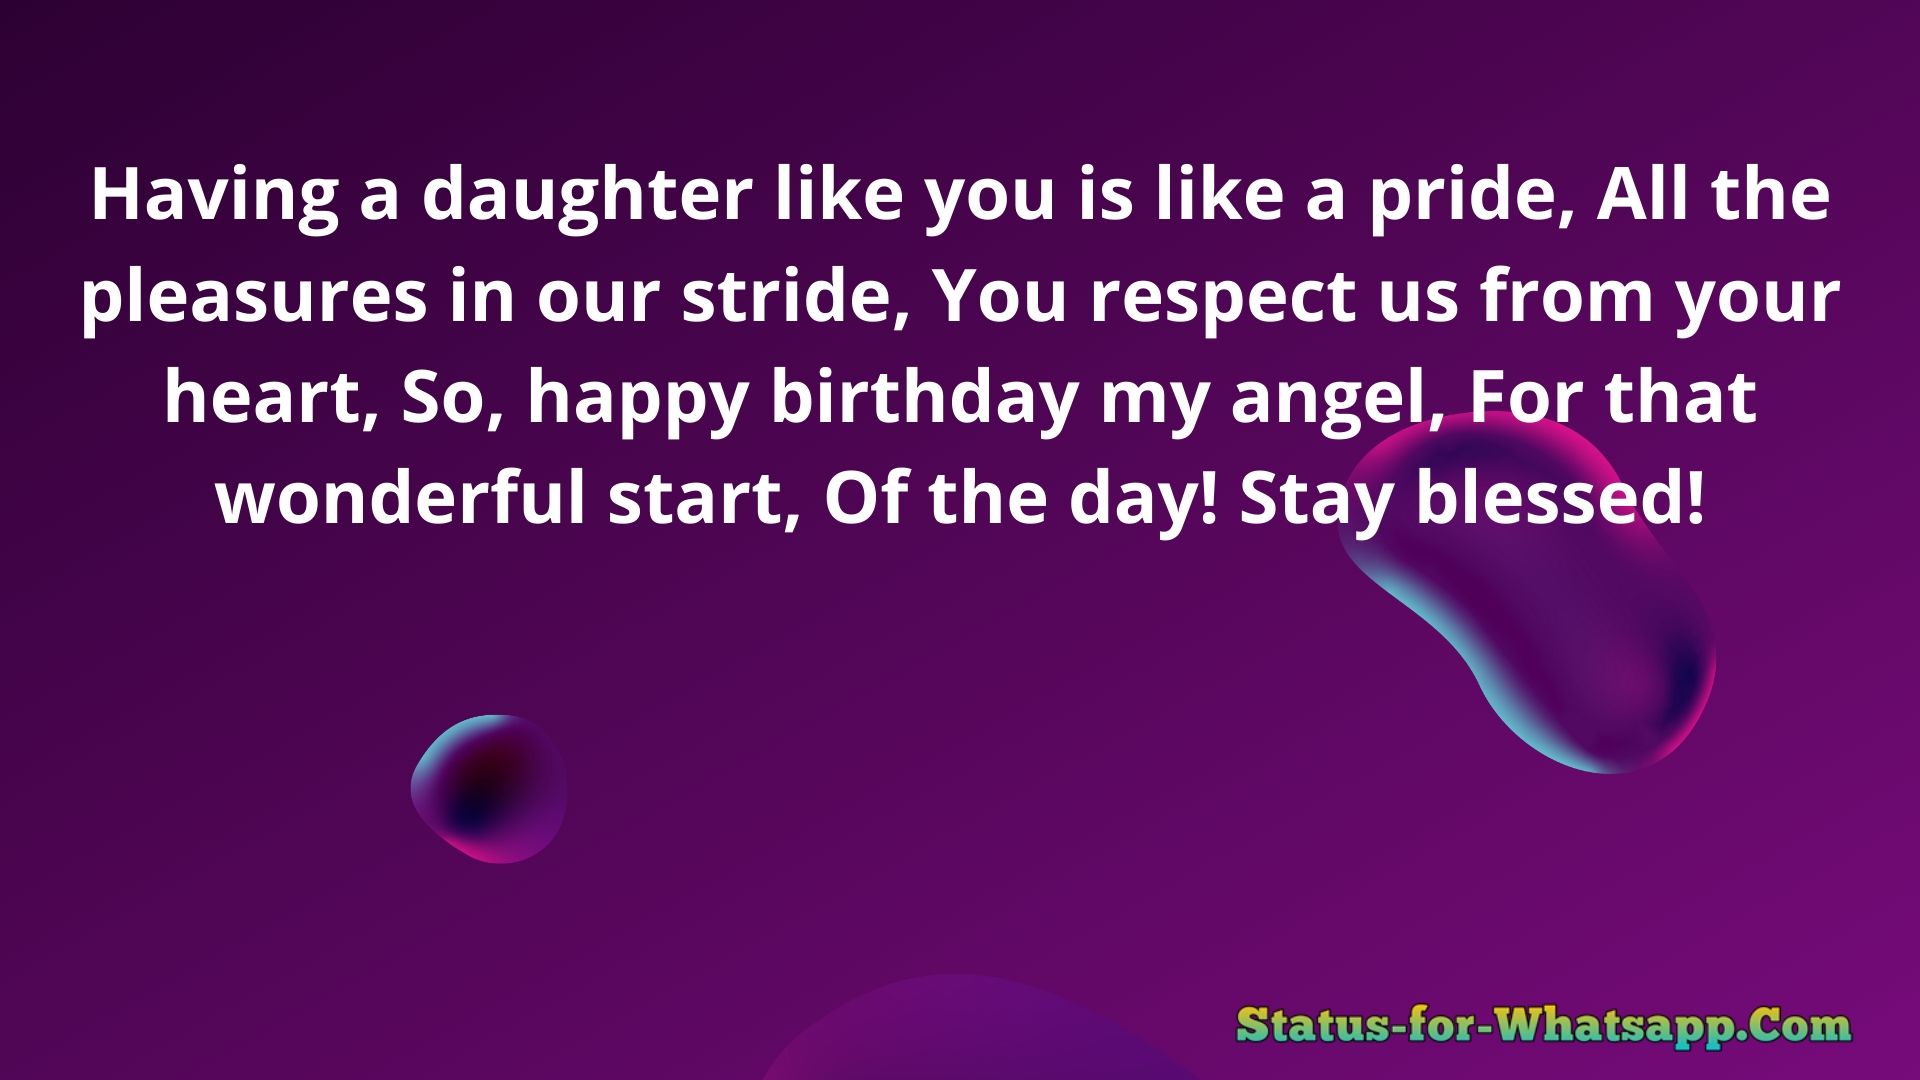 Birthday Wishes For Daughter birthday quotes, birthday greetings, birthday wishes quotes, birthday message, birthday wishes messages, wish you happy birthday, happy birthday daughter, birthday wishes to daughter, happy birthday daughter images, special birthday wishes, simple birthday wishes